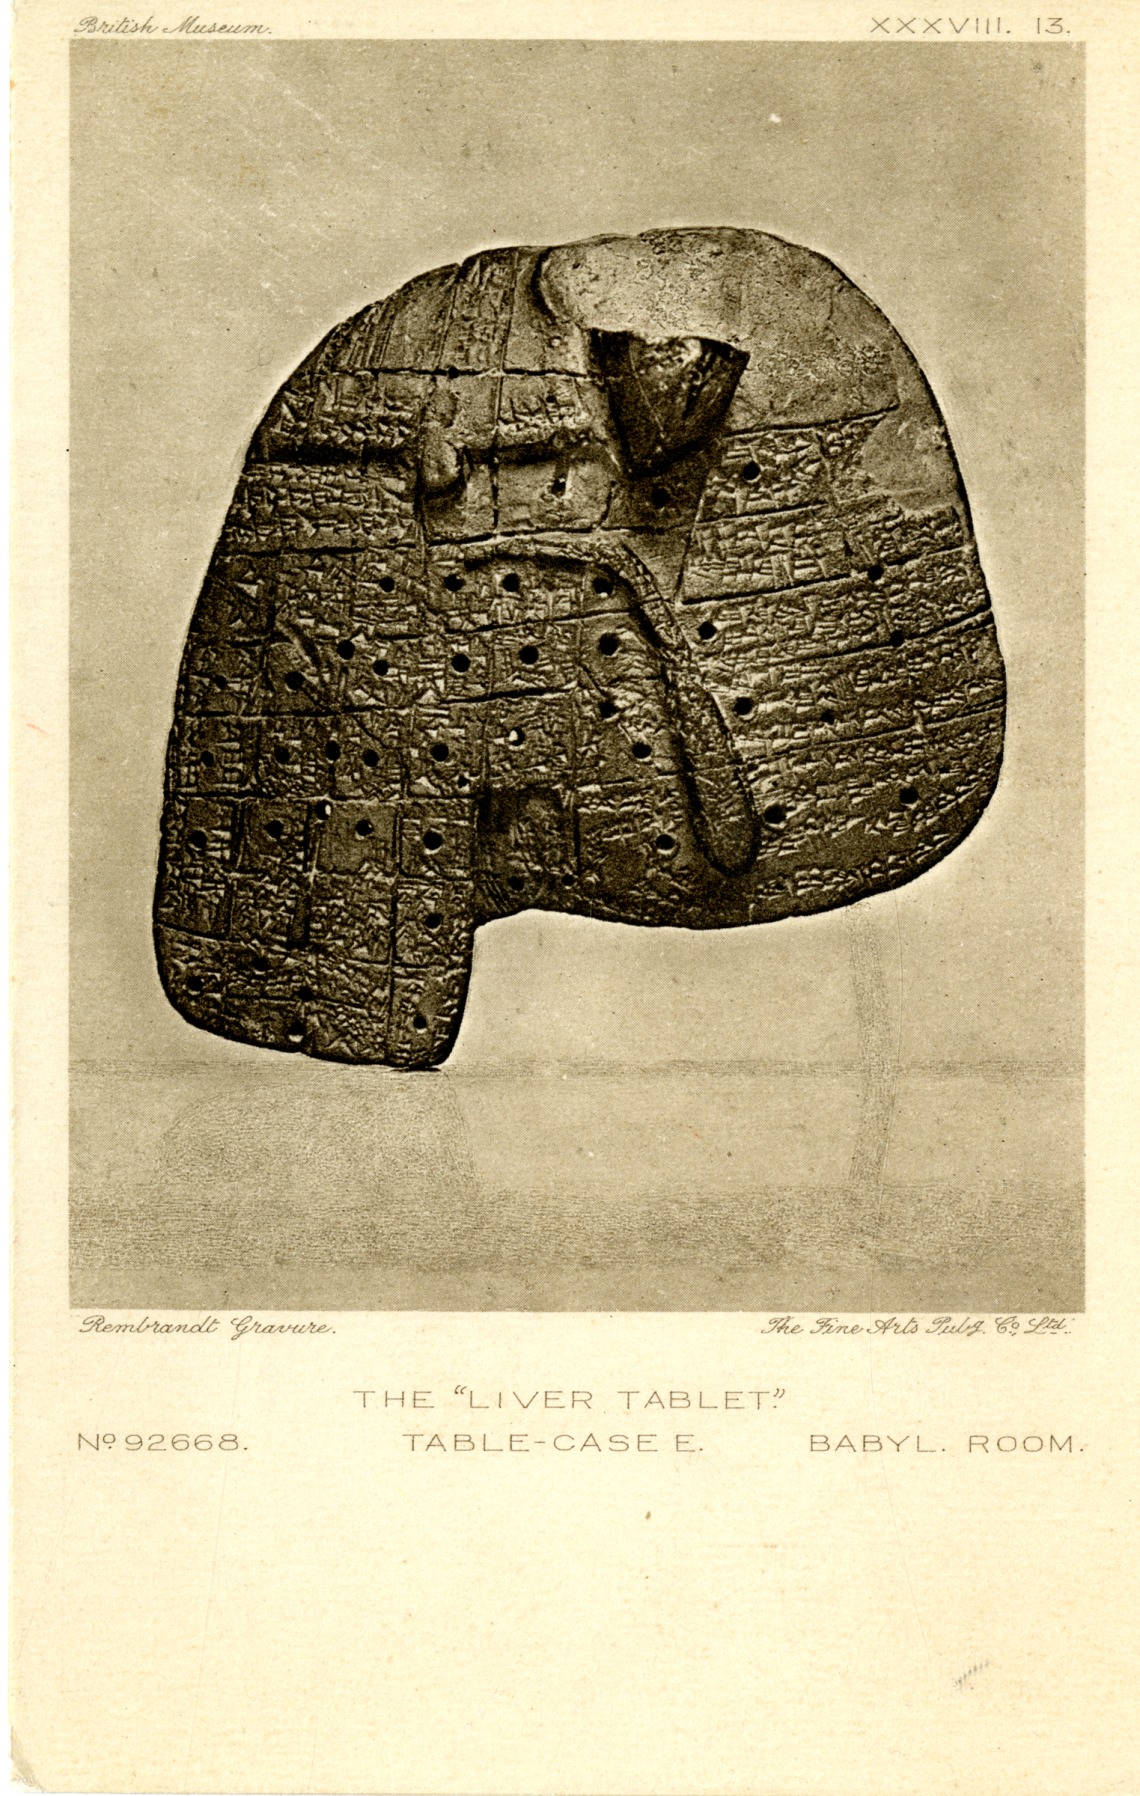 Postcard: Clay Model of Sheep's Liver. This tourist postcard shows a clay model of a sheep’s liver in the British Museum. The liver tablet was used by priests in southern Iraq ca. 1900–1600 BCE to interpret the natural blemishes (ciphers) on the liver of a freshly-butchered sheep. The cuneiform writing on the clay tablet guided the divination ceremony, but today the writing is another layer of cipher to all who cannot translate cuneiform.